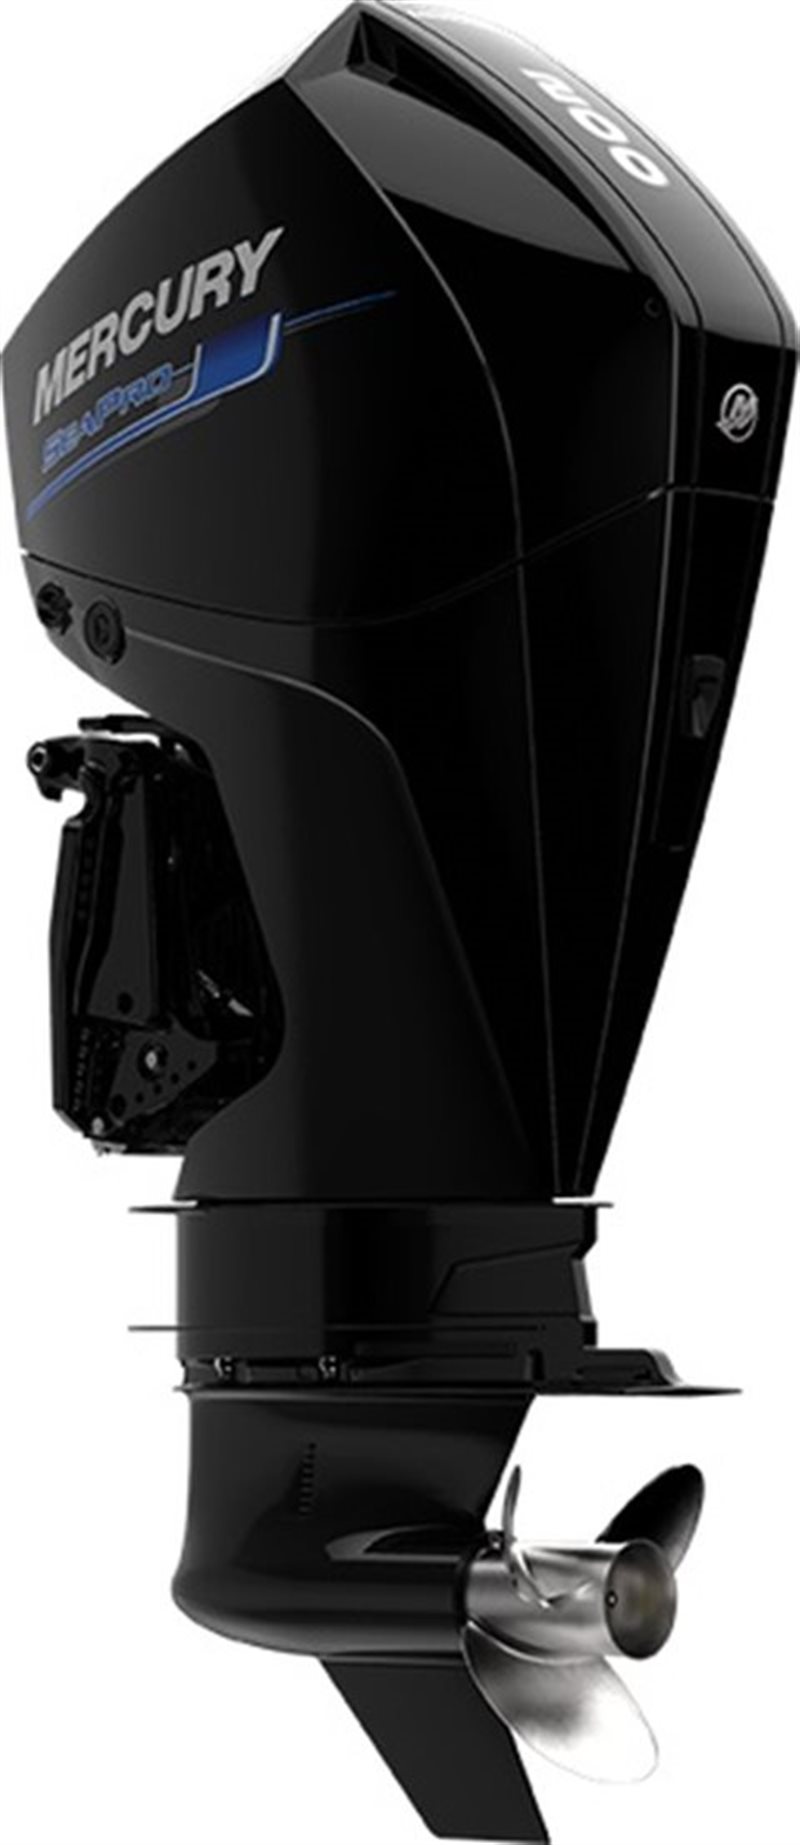 2020 Mercury Outboard SeaPro 200 - 300 SeaPro 200 at Fort Fremont Marine